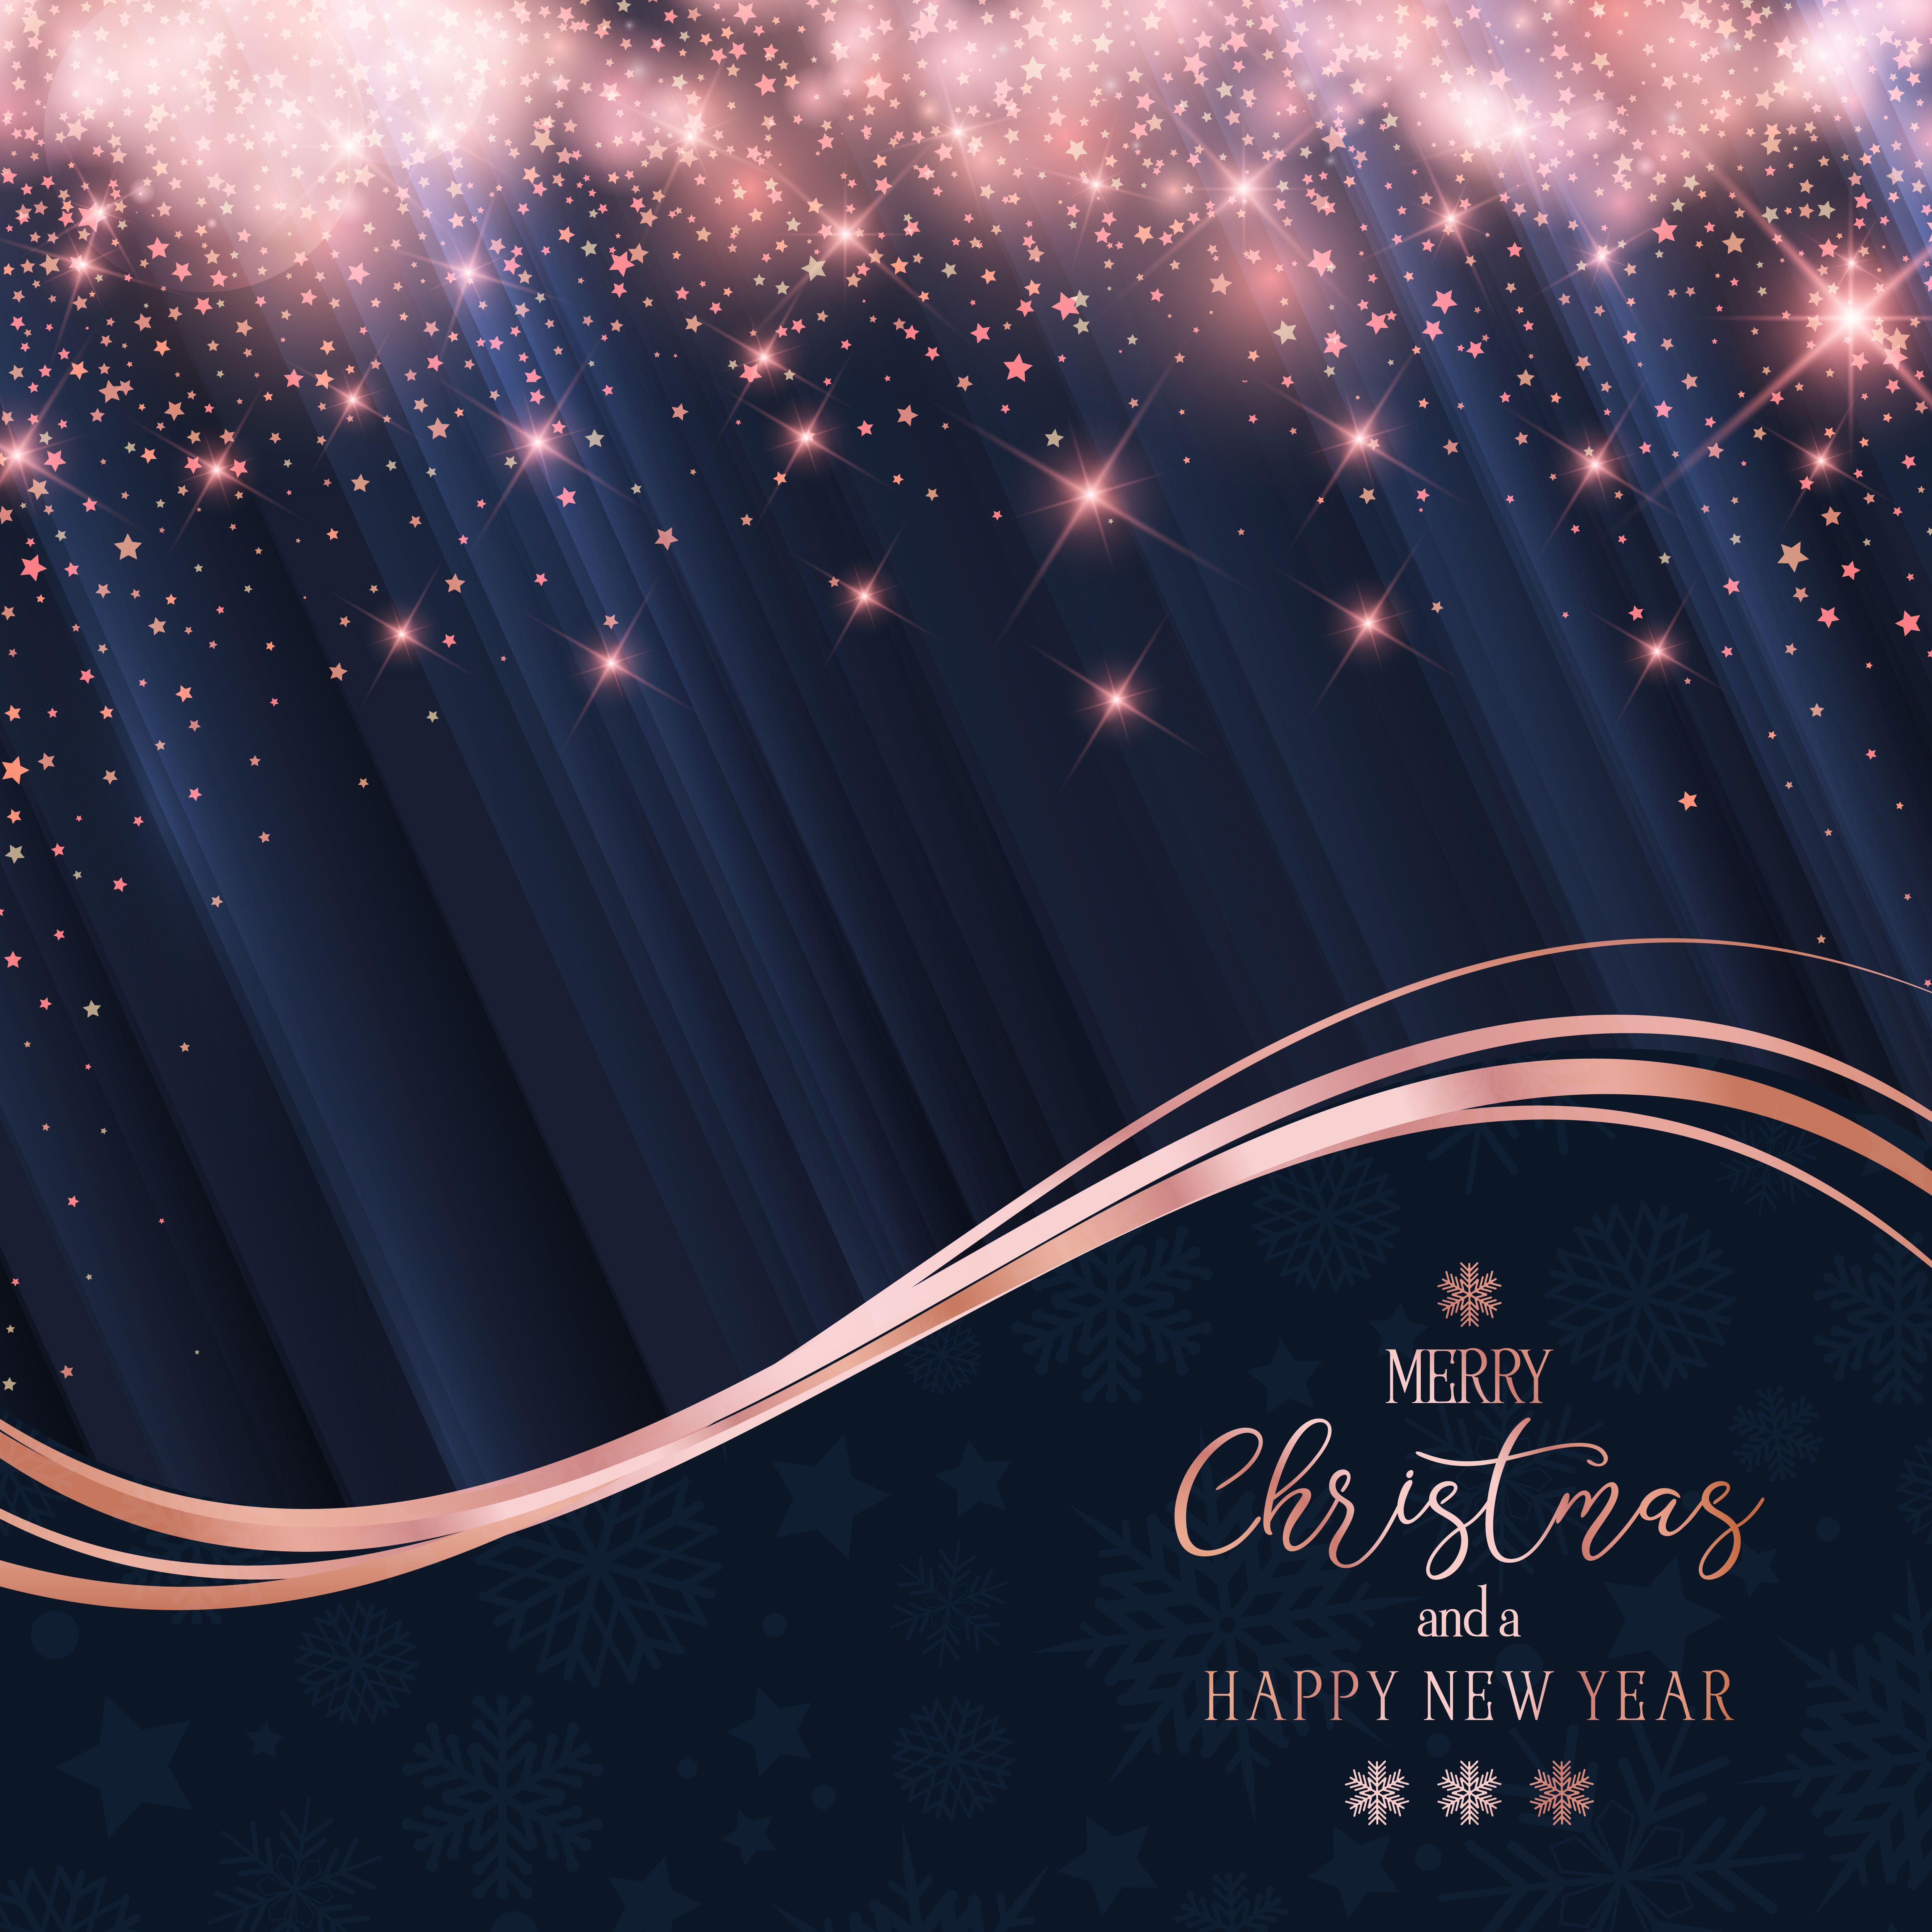 Christmas and New Year sparkle background Free Vectors, Clipart Graphics & Vector Art